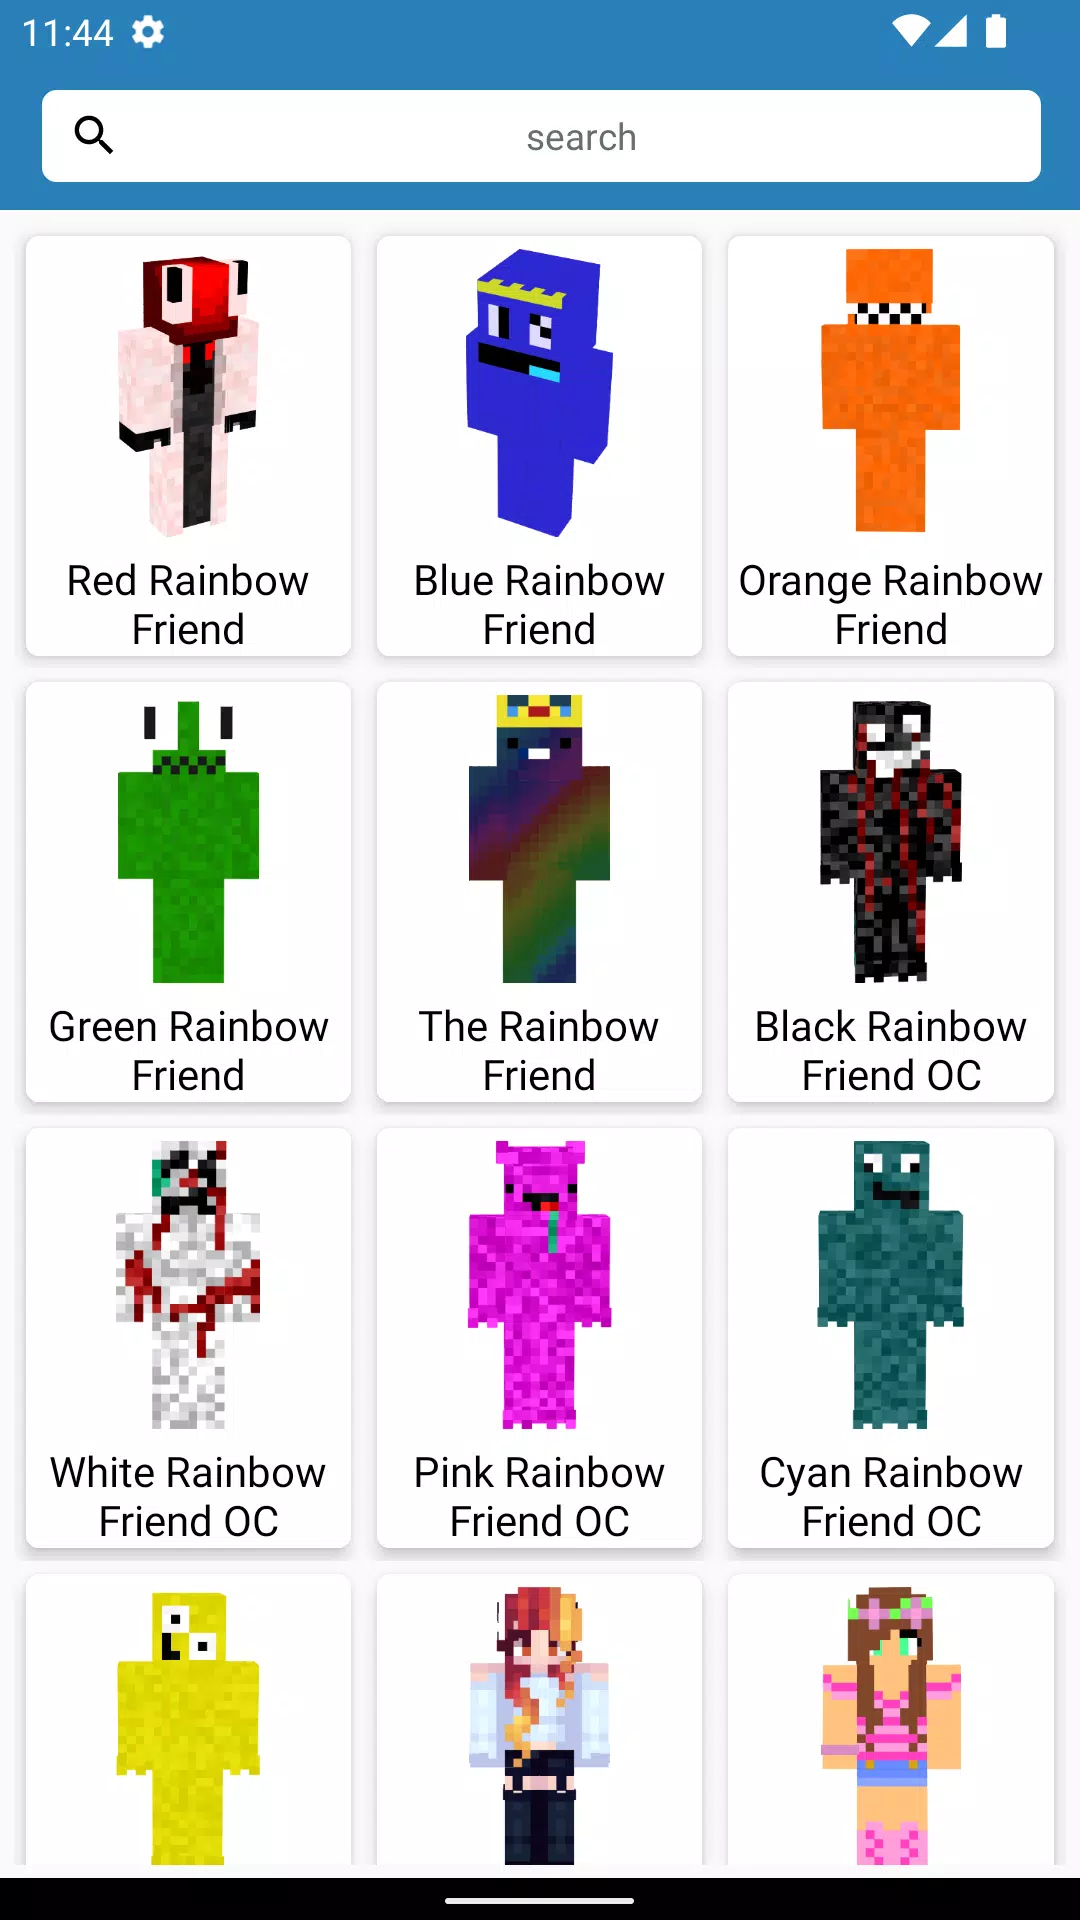 Rainbow Friend Skin for MCPE APK for Android Download